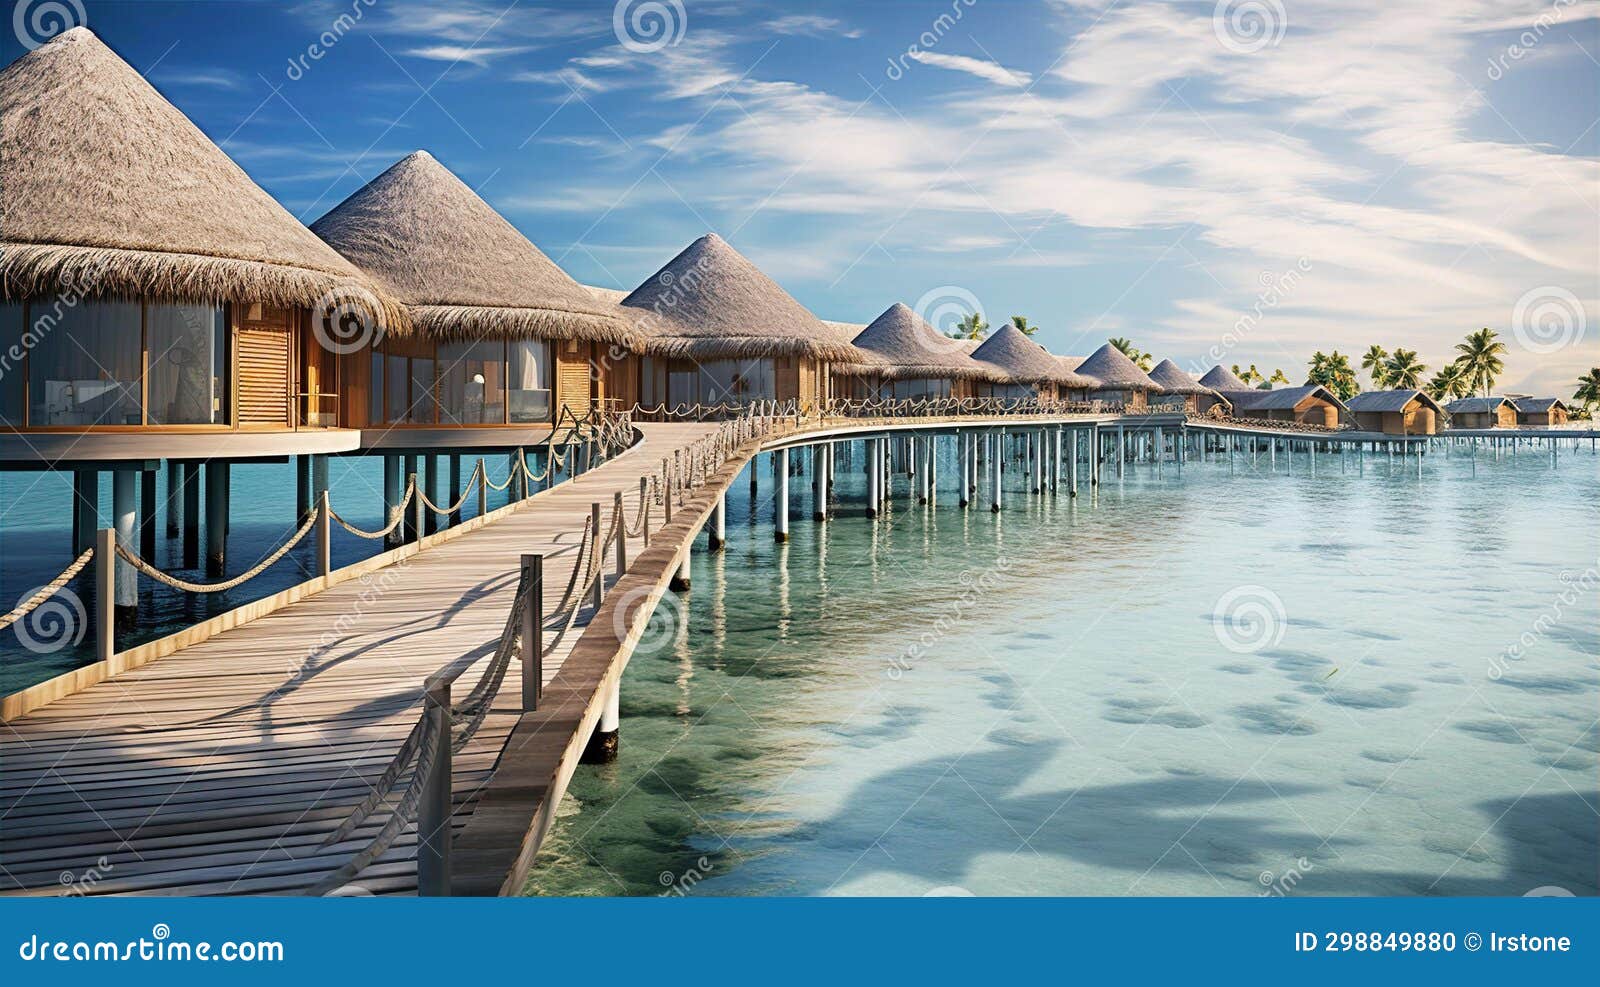 : over water villas line in maldivas with wooden foot bridge at sunset, holiday ad travel concept